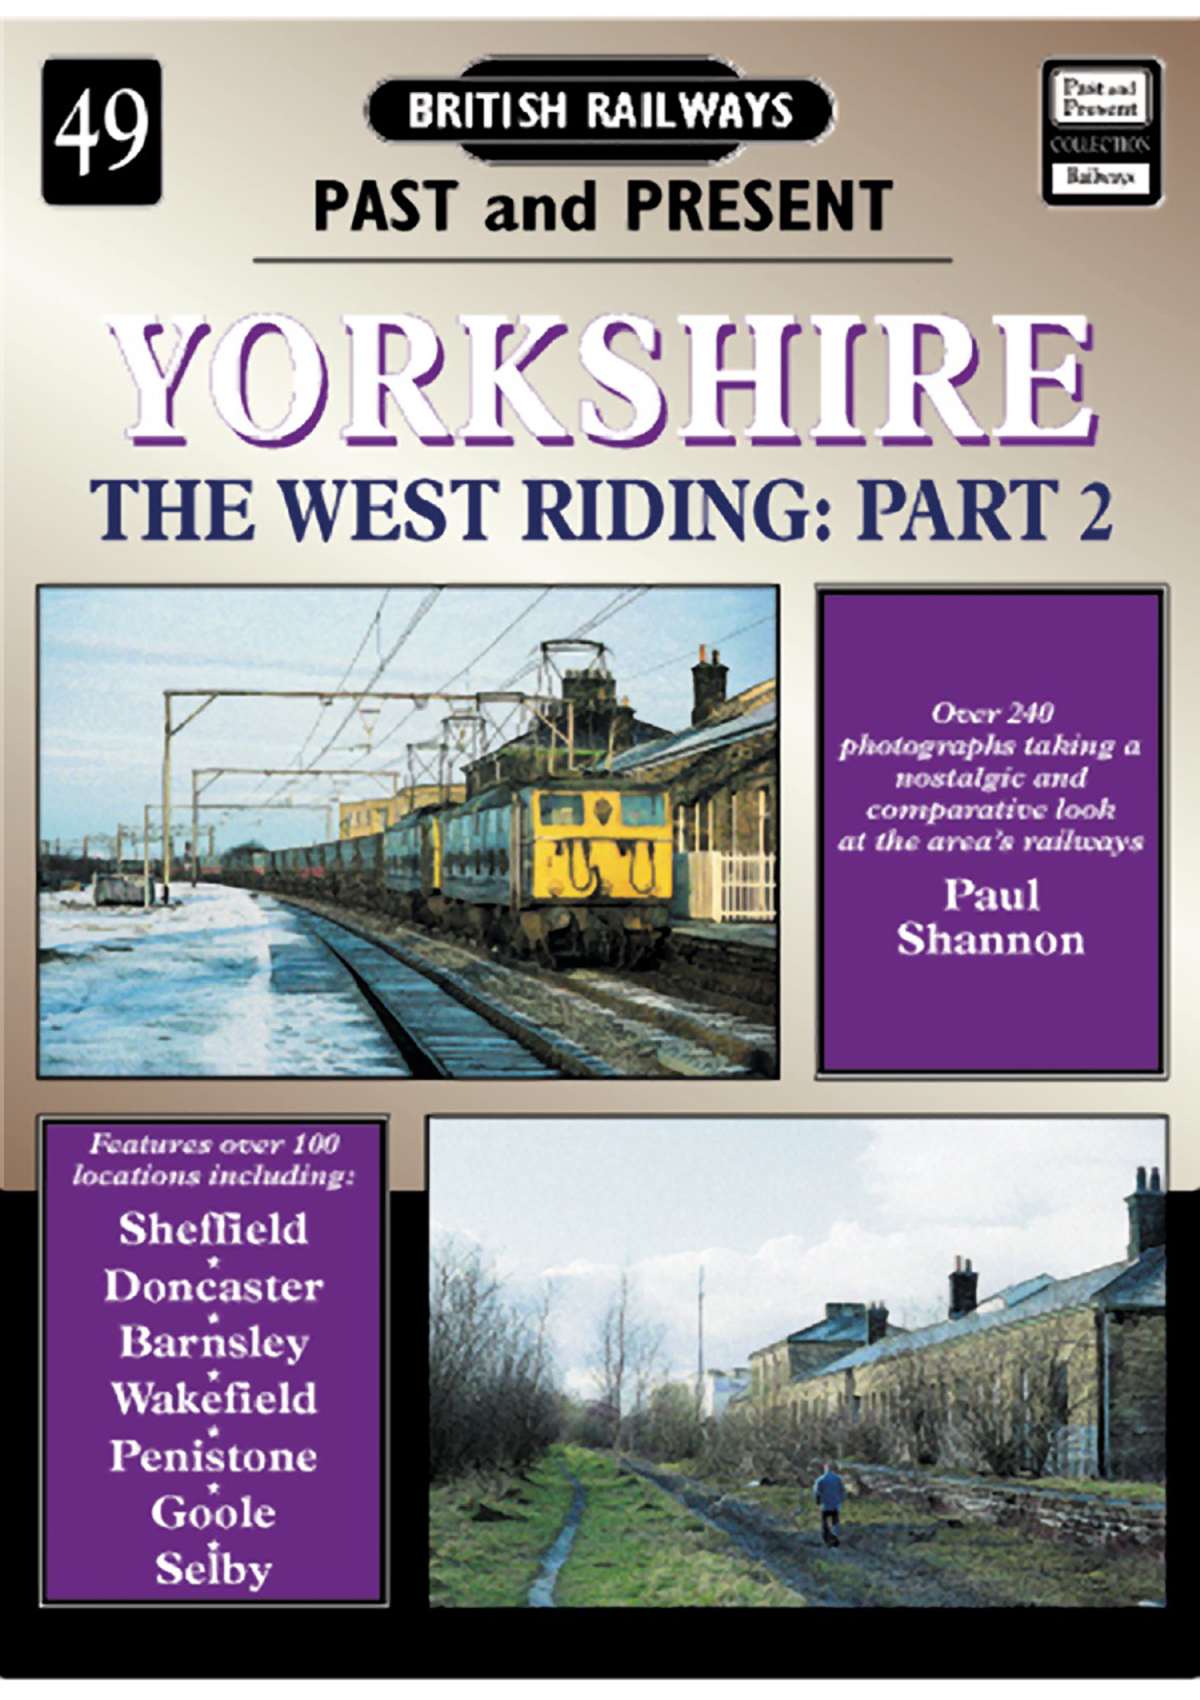 2413 - No 49: Yorkshire  The West Riding Part 2